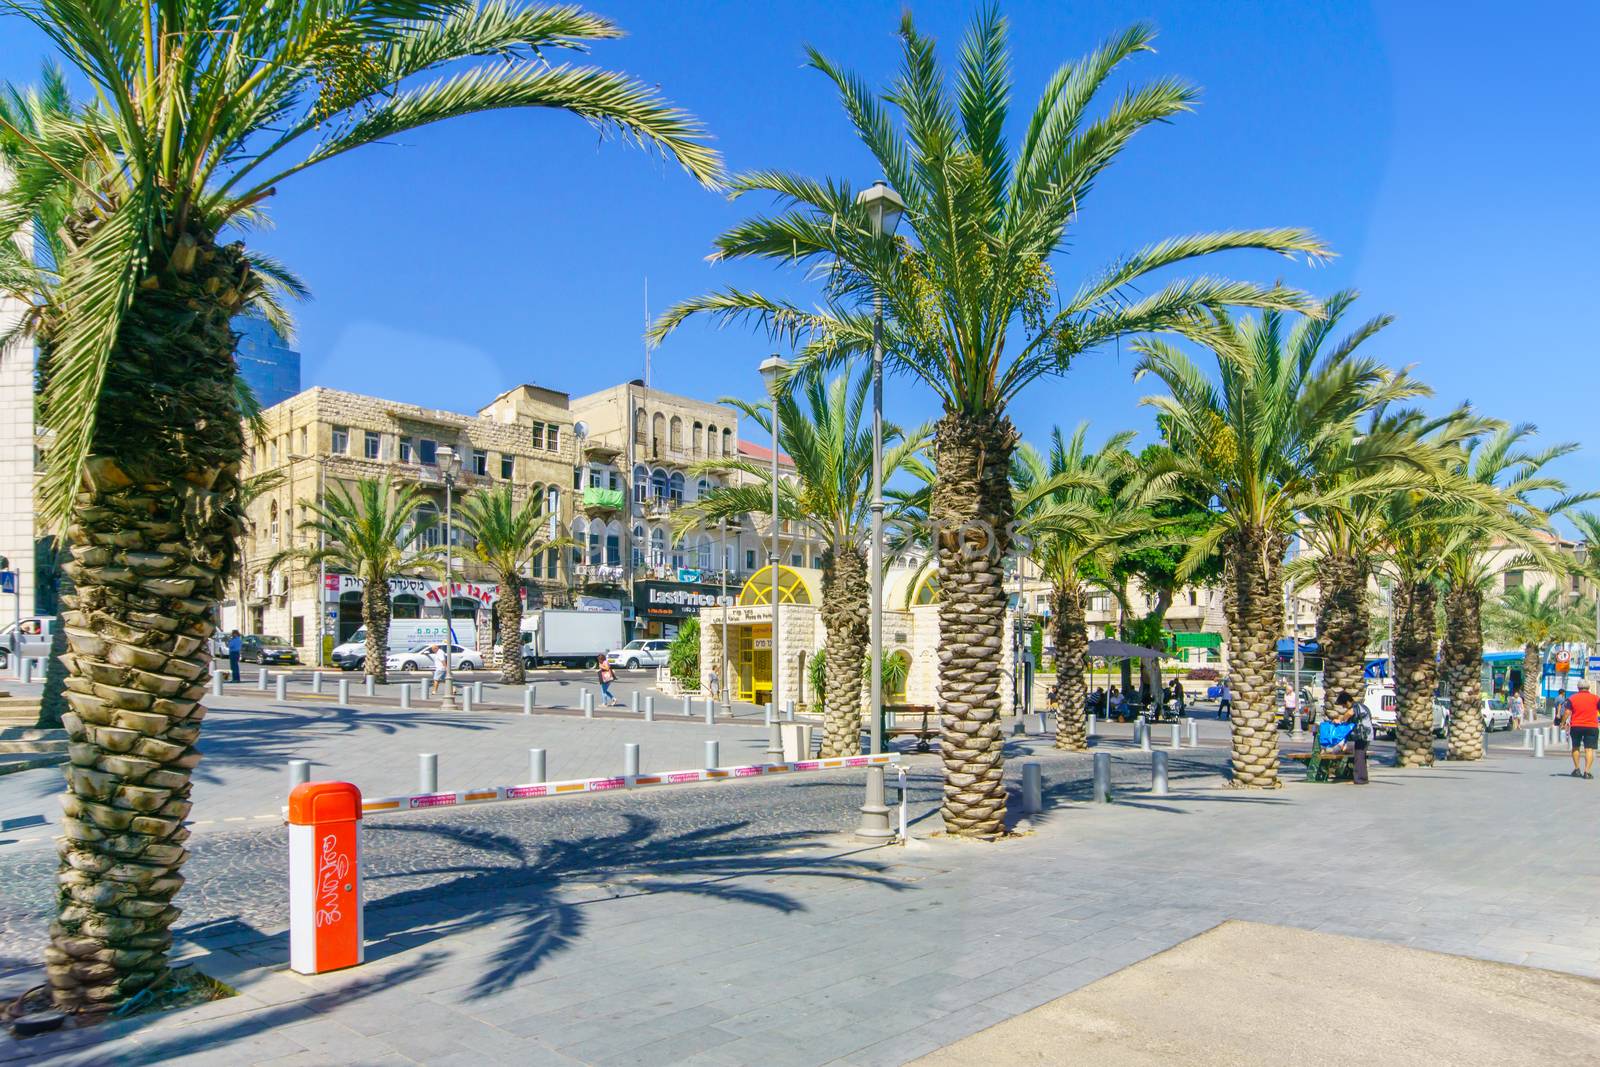 HAIFA, ISRAEL - JULY 21, 2015: Scene of Paris square, and its subway (Carmelit) station, with local and visitors. It is one of the major commercial squares in downtown Haifa, Israel